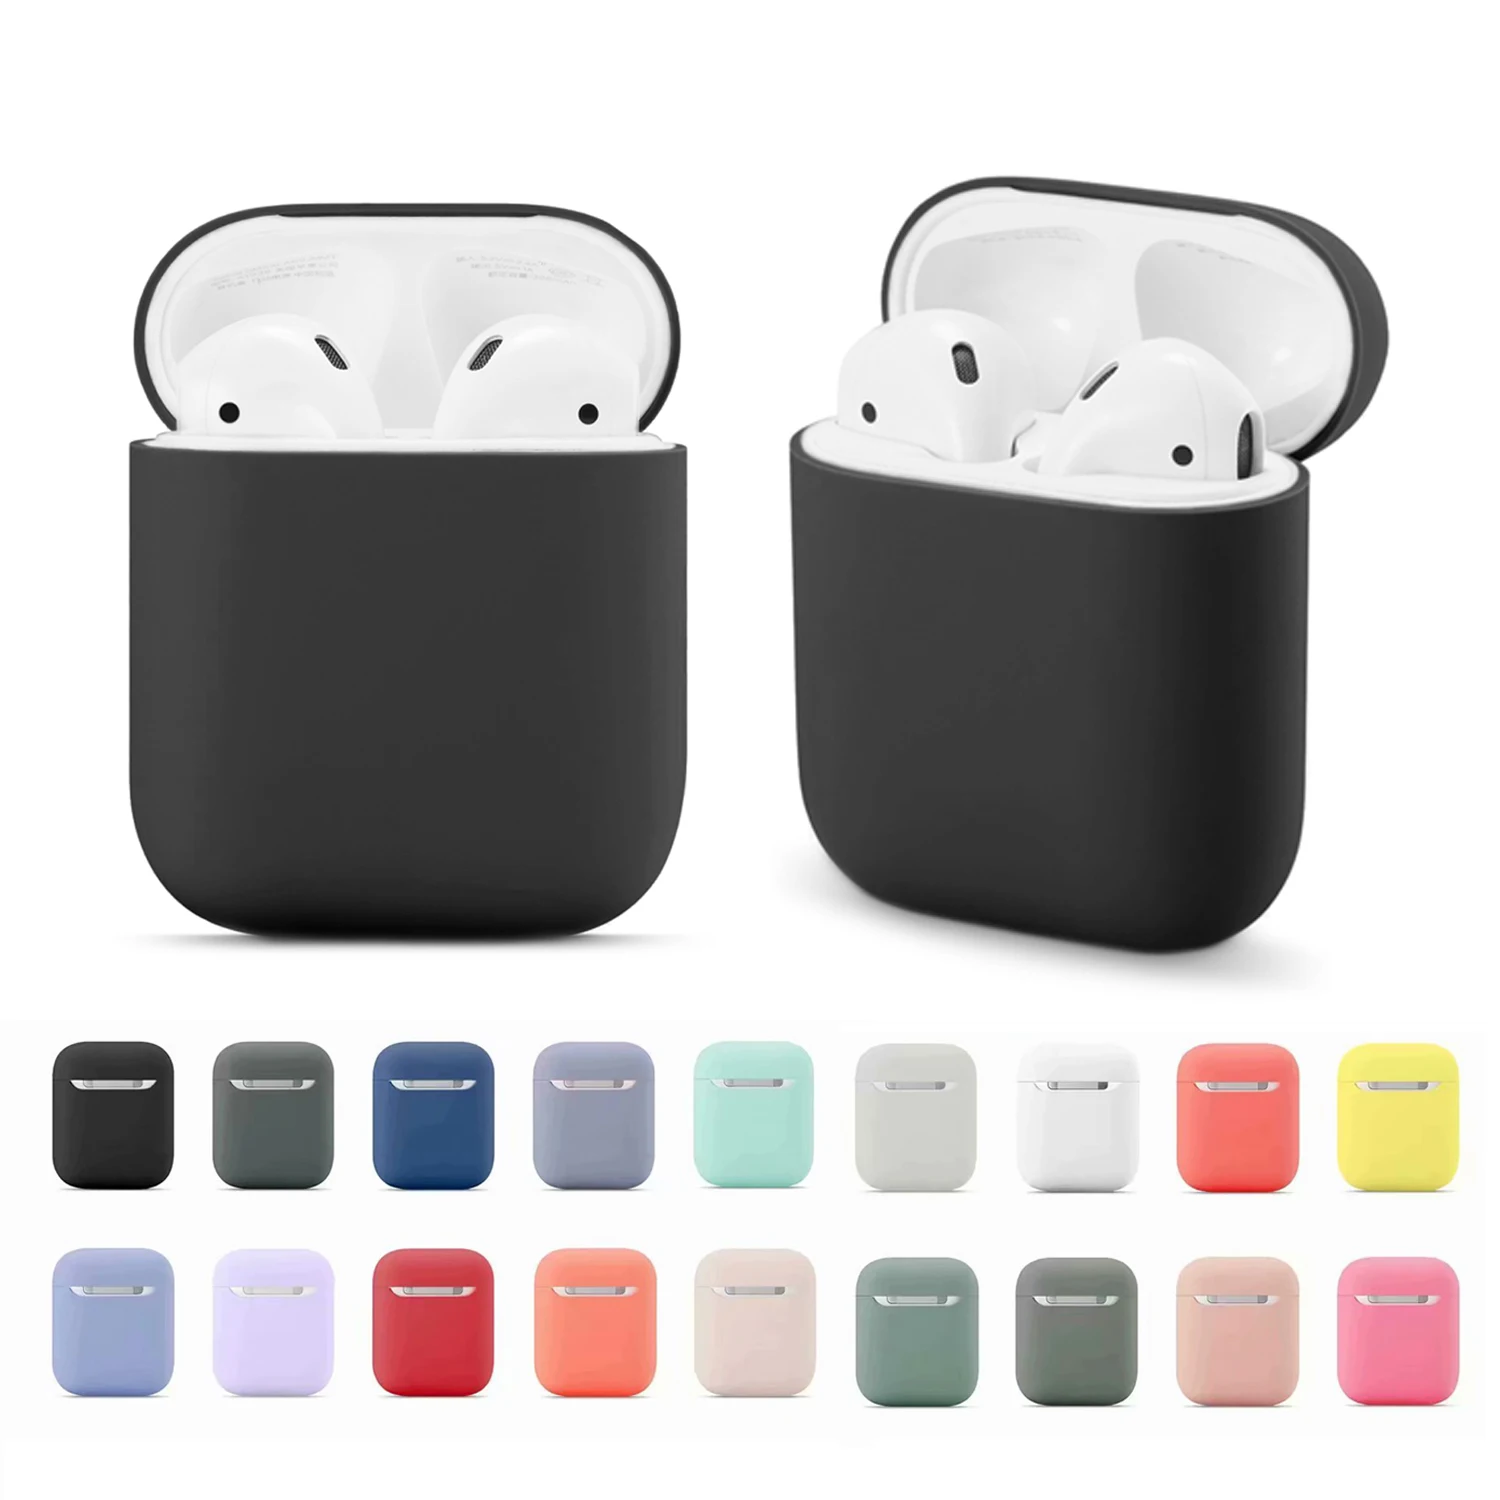 Soft Silicone Case For Apple Airpods 1/2 Protective Fit for Bluetooth Wireless Earphone Case For Apple Air Pods Charging Box Bag